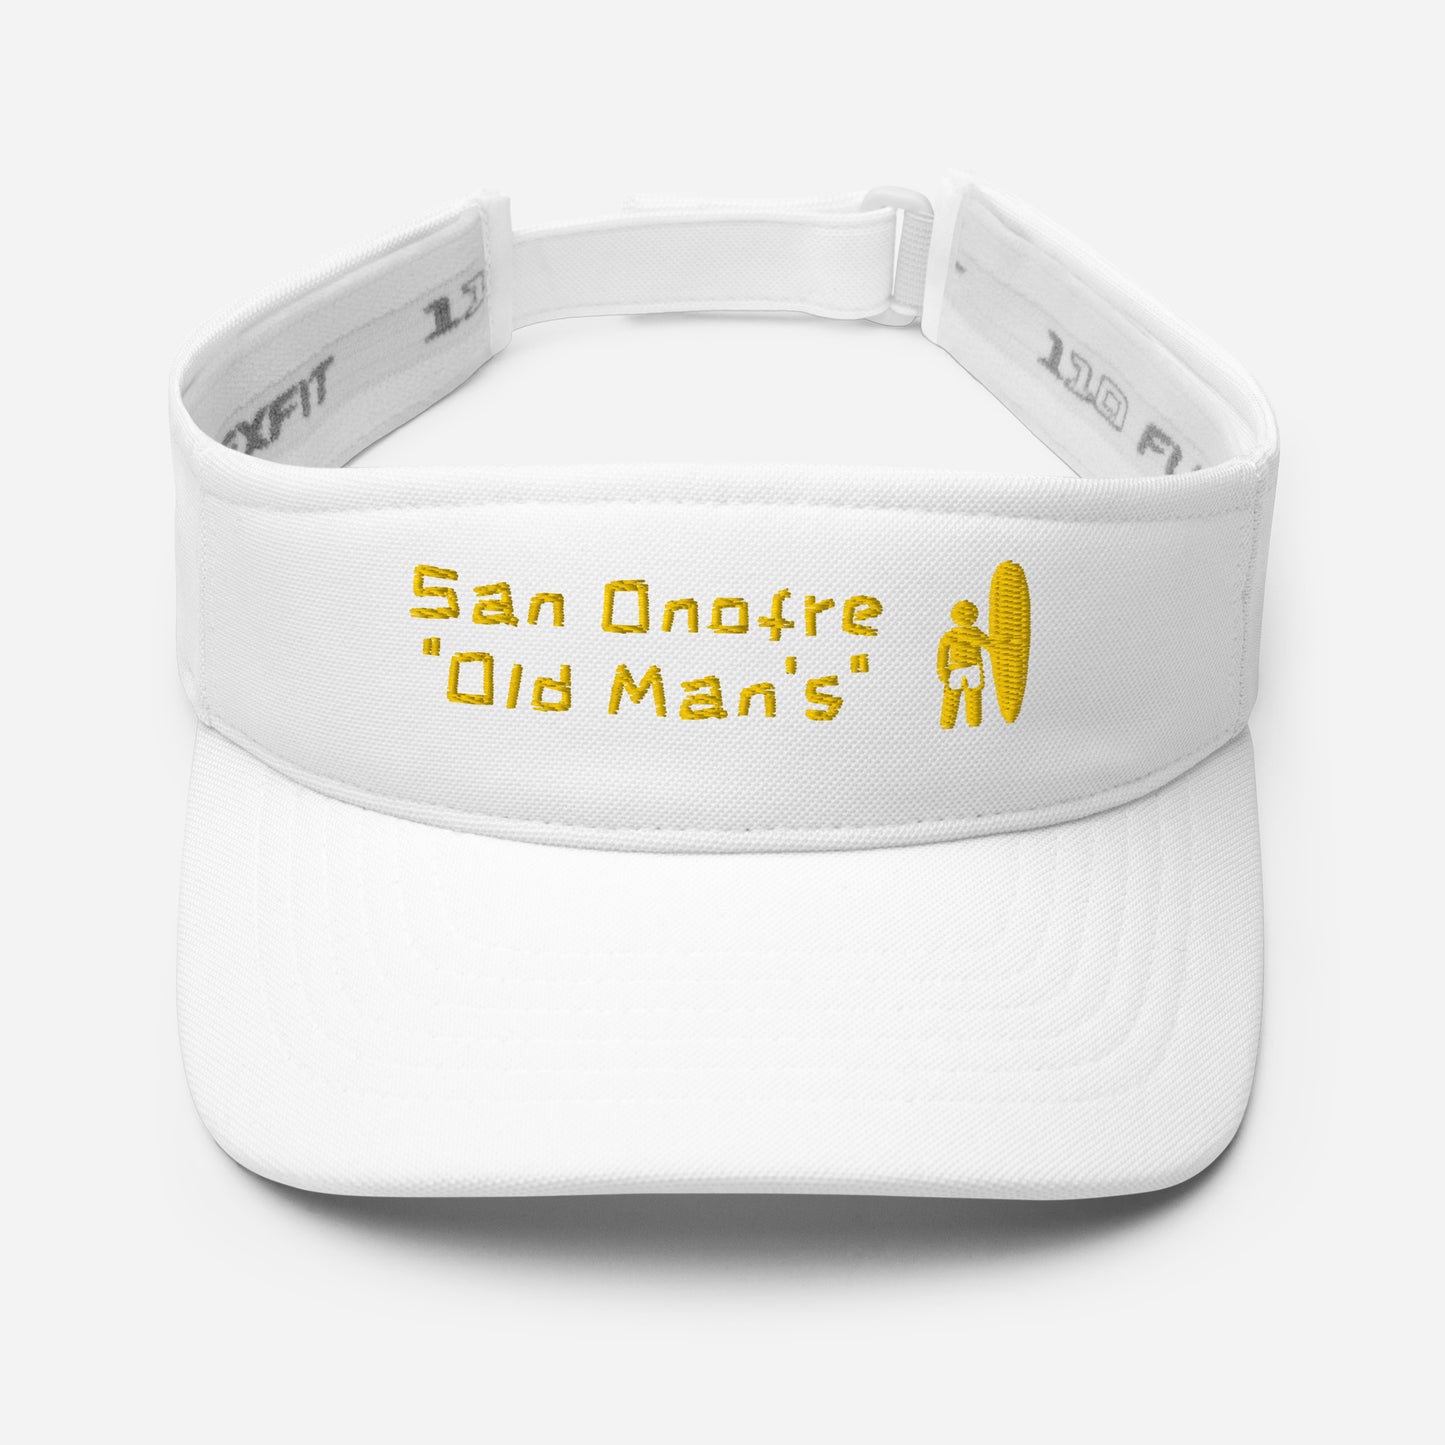 San Onofre Surfing Old Mans California Visor